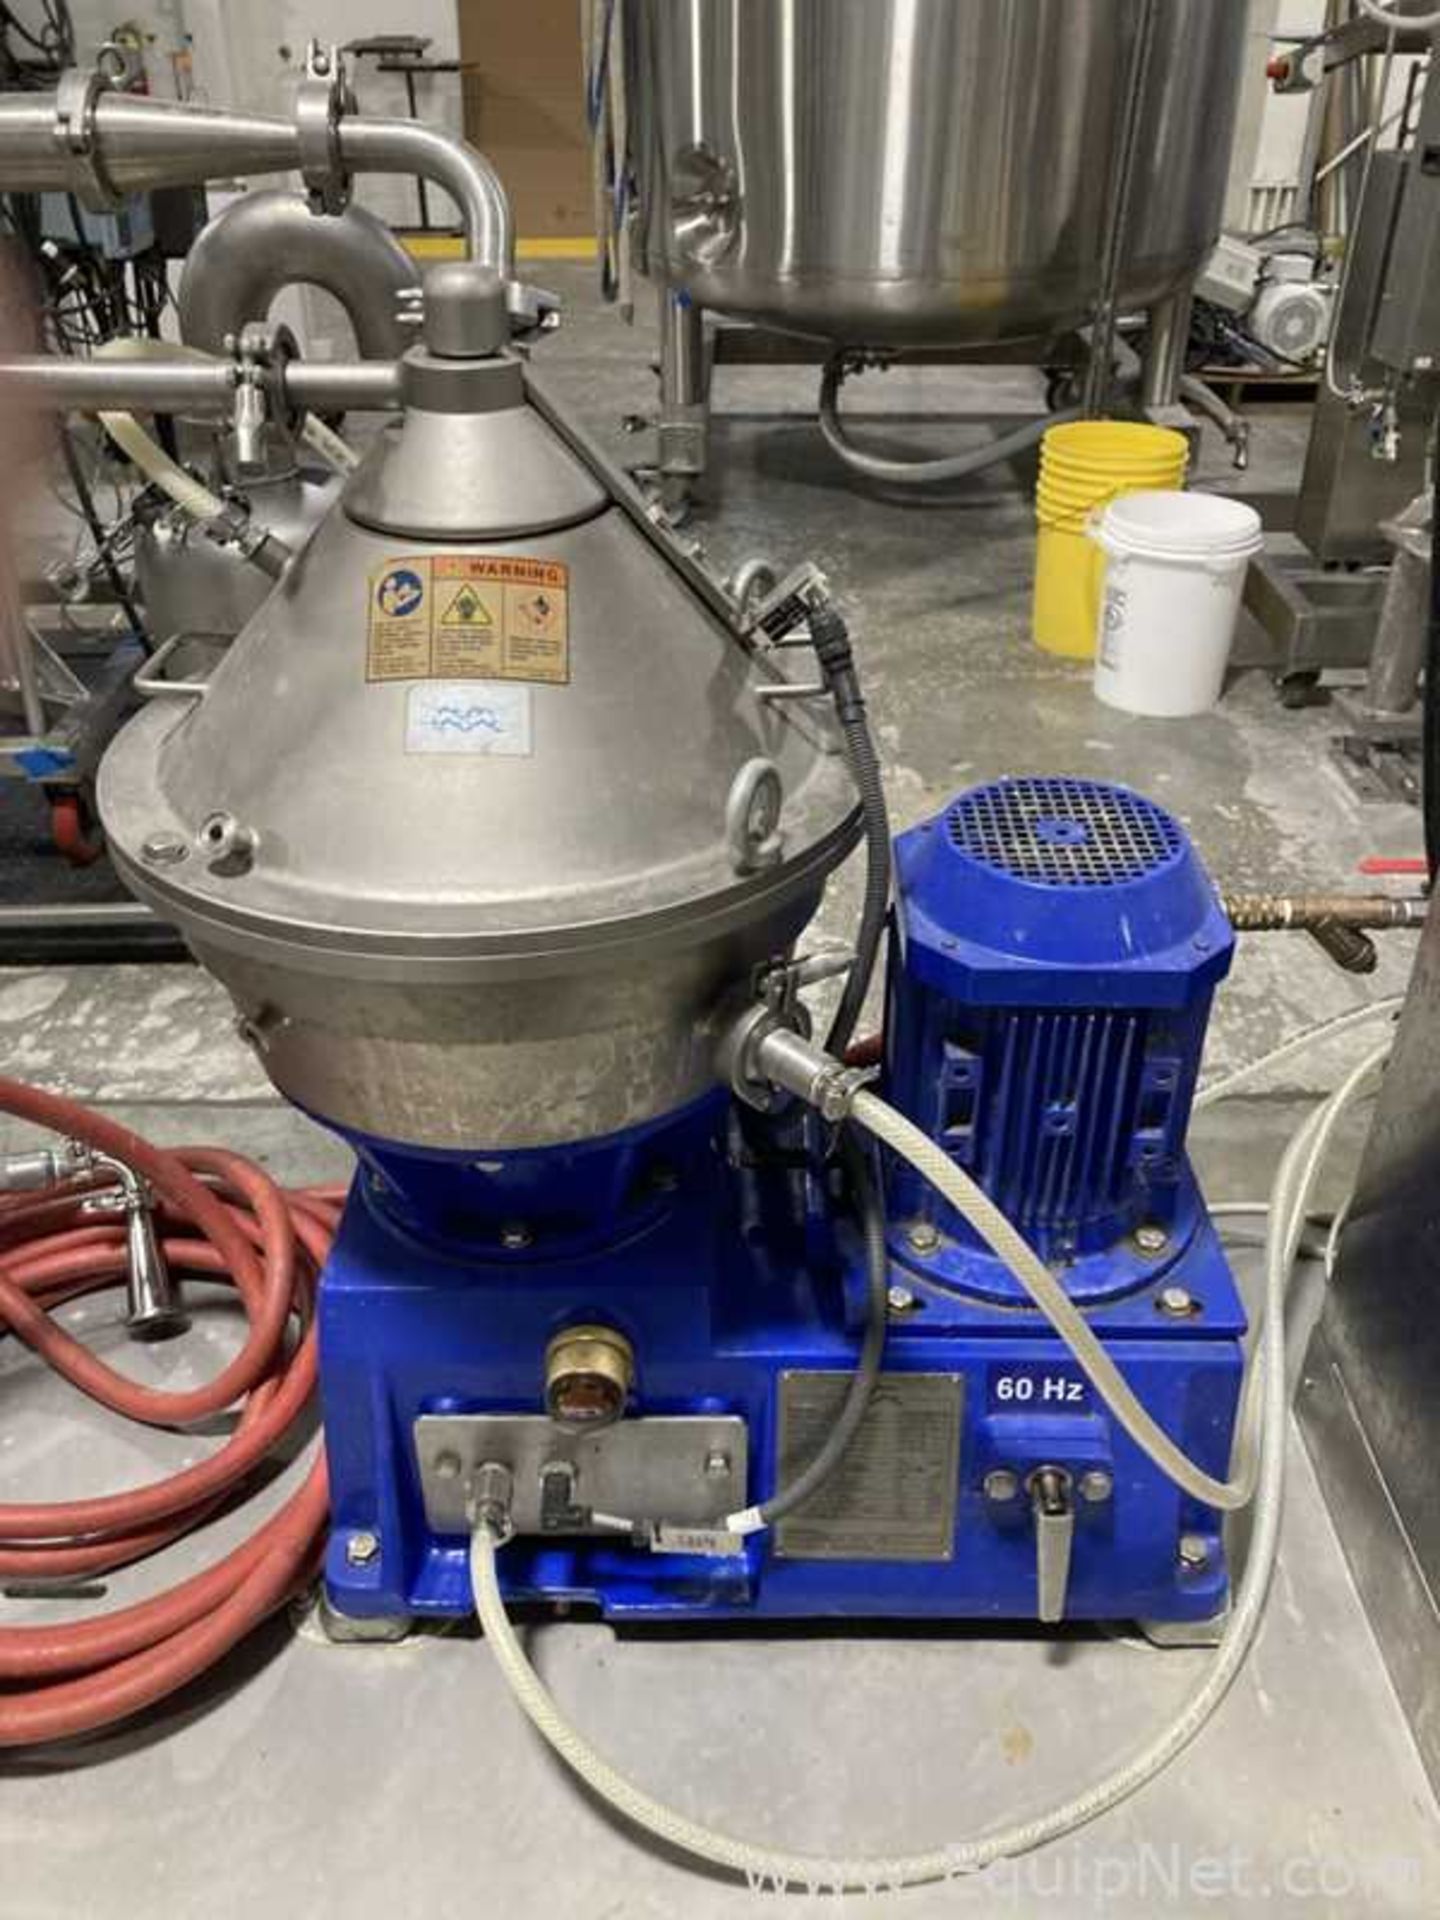 Alfa Laval LAPX 404 Stainless Steel Skid Mounted Centrifuge with Pump Cart - Image 2 of 15